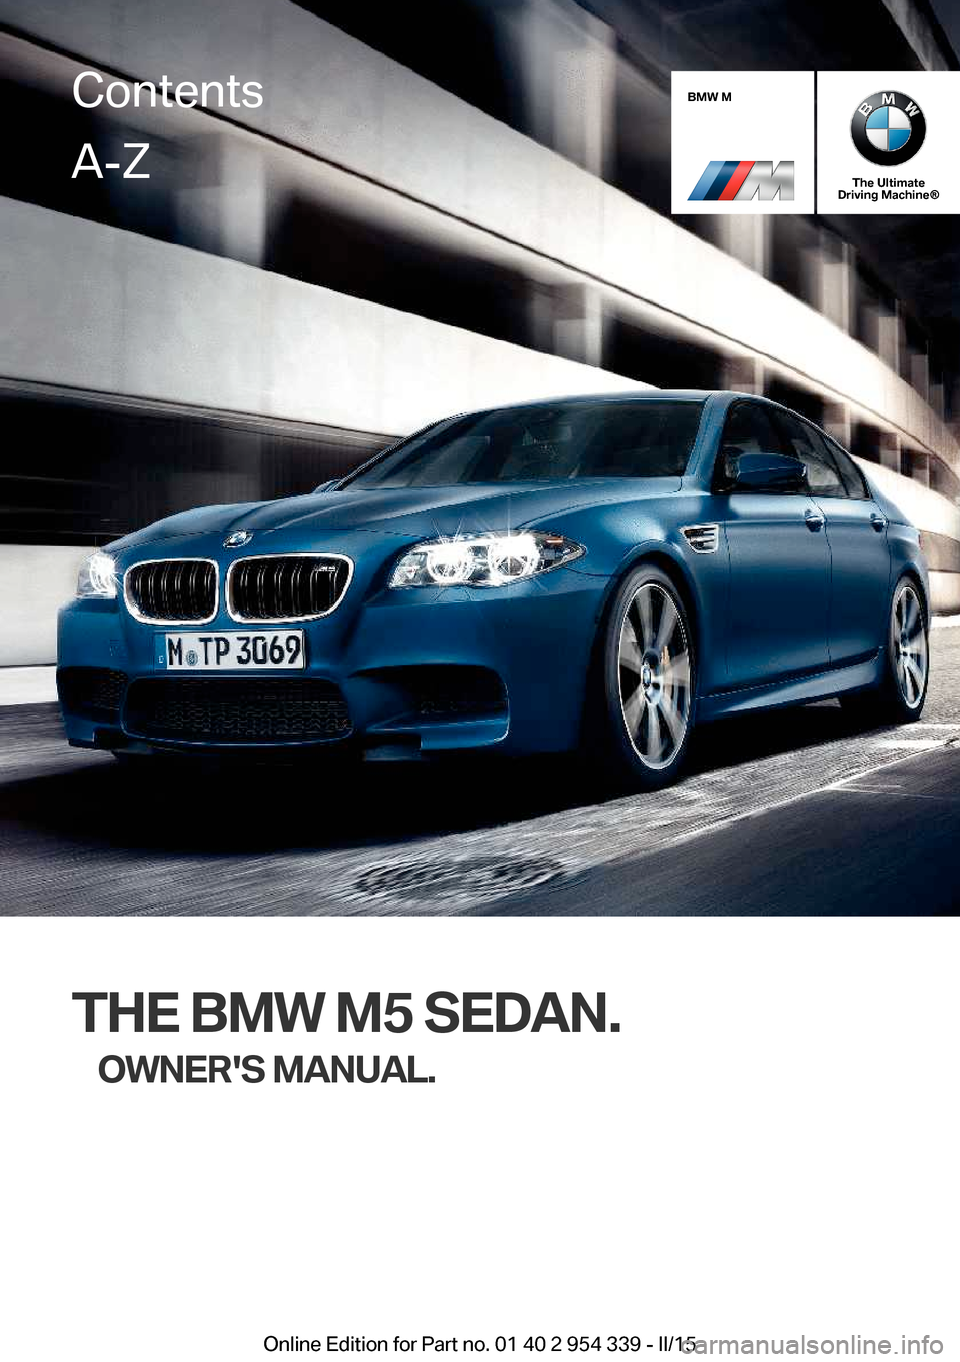 BMW M5 2016 F10M Owners Manual BMW M
The Ultimate
Driving Machine®
THE BMW M5 SEDAN.
OWNERS MANUAL.
ContentsA-Z
Online Edition for Part no. 01 40 2 954 339 - II/15   